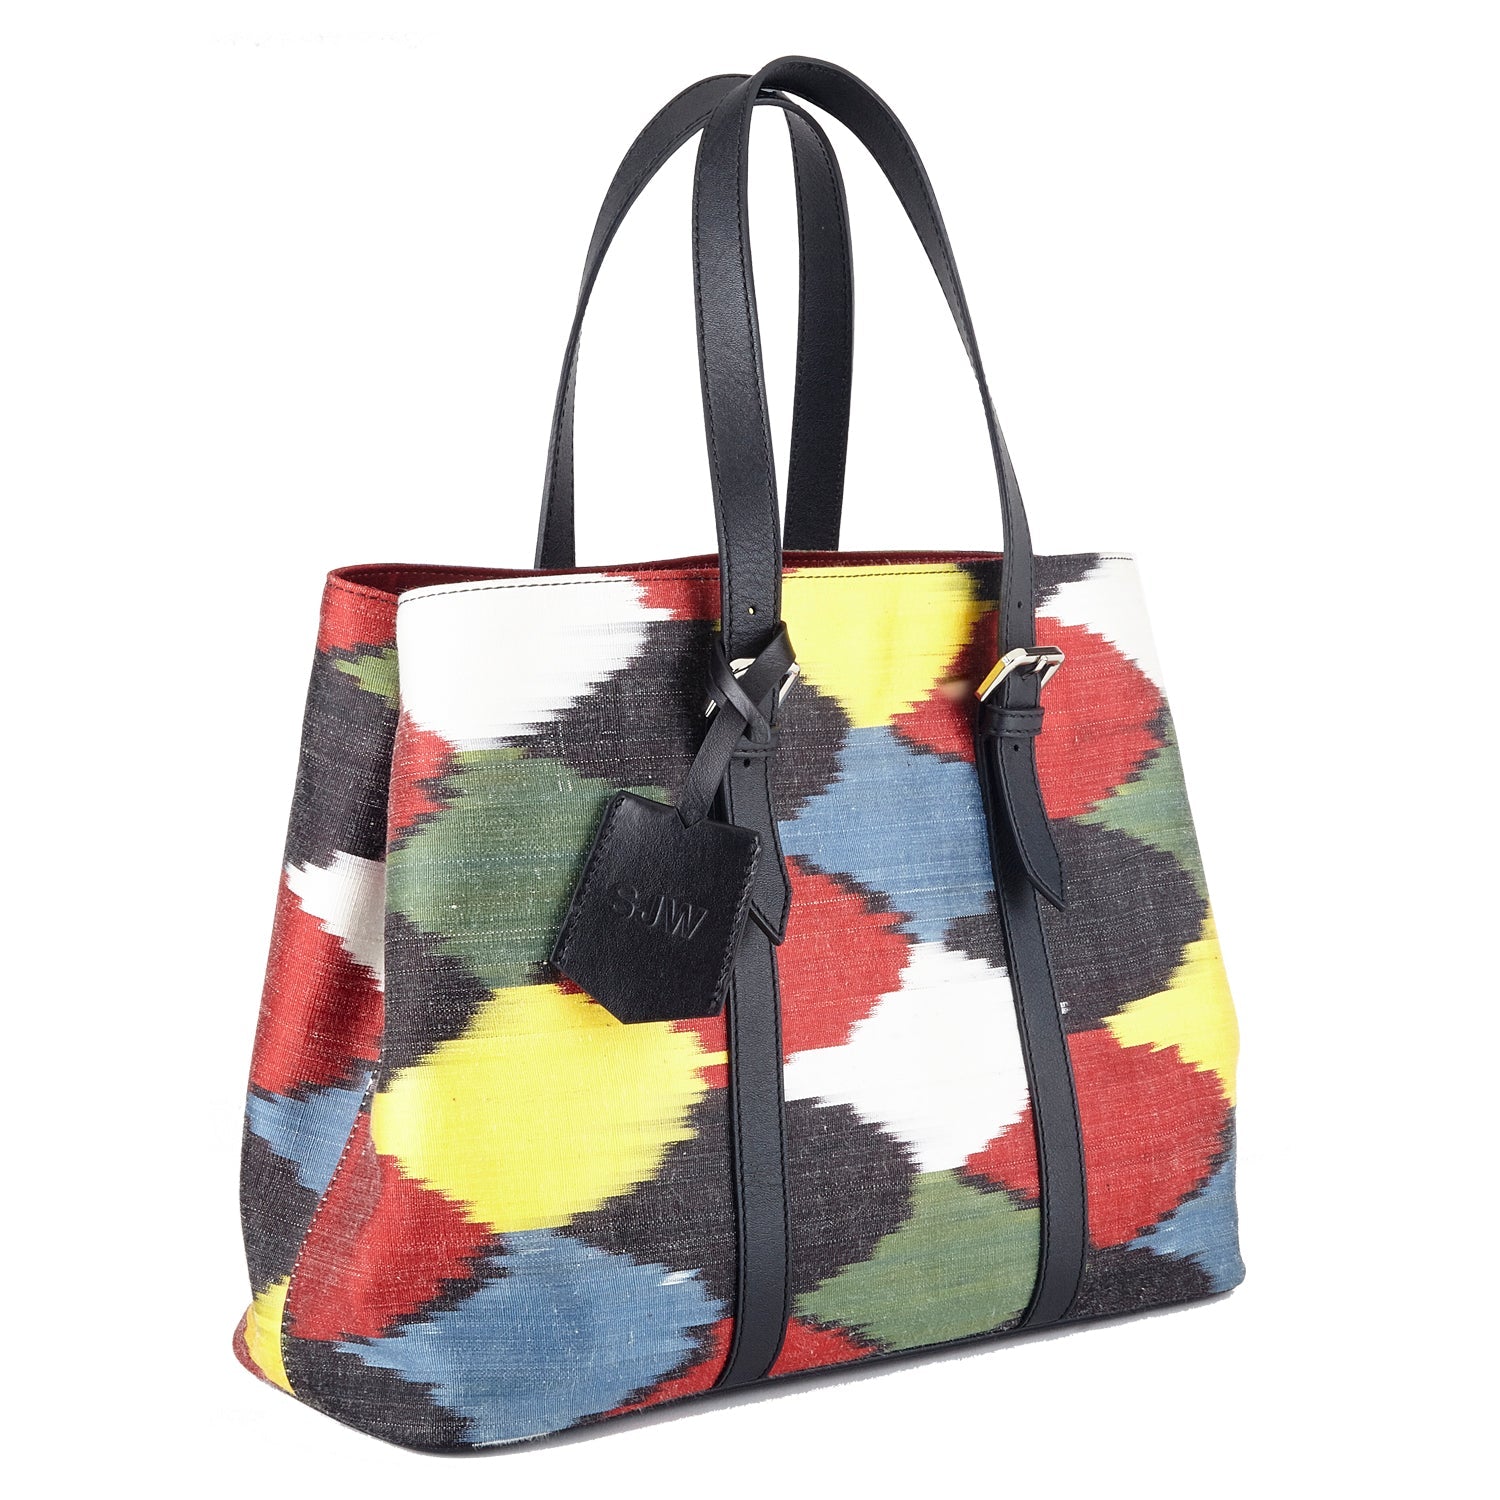 Avenue Sustainable Handmade Leather and Ikat Tote Bag in Black - SJW BAGS LONDON